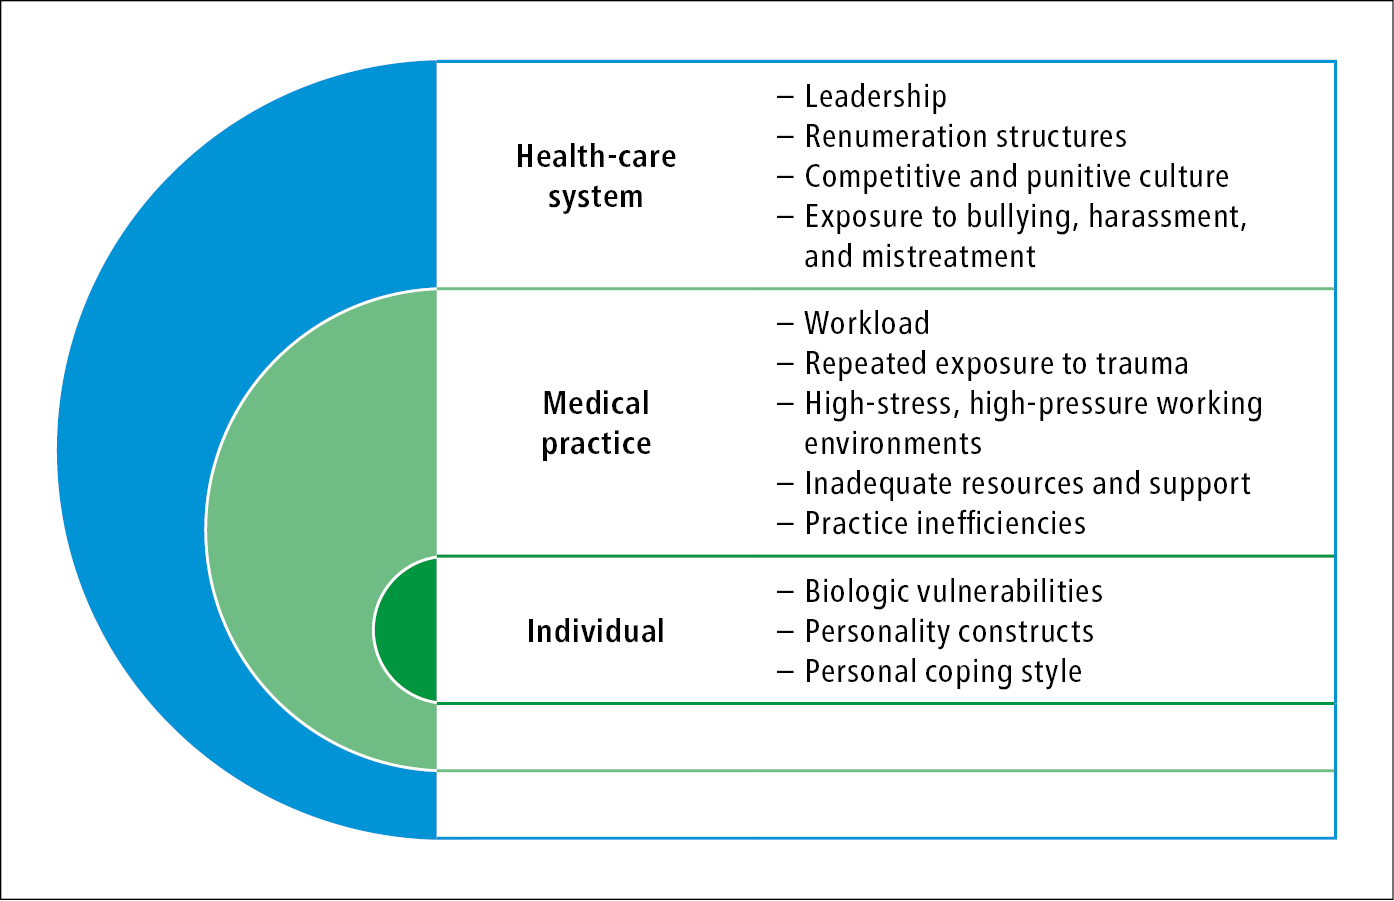 Figure 031_3480.  A multifactorial lens to understanding the causes of physician burnout. 